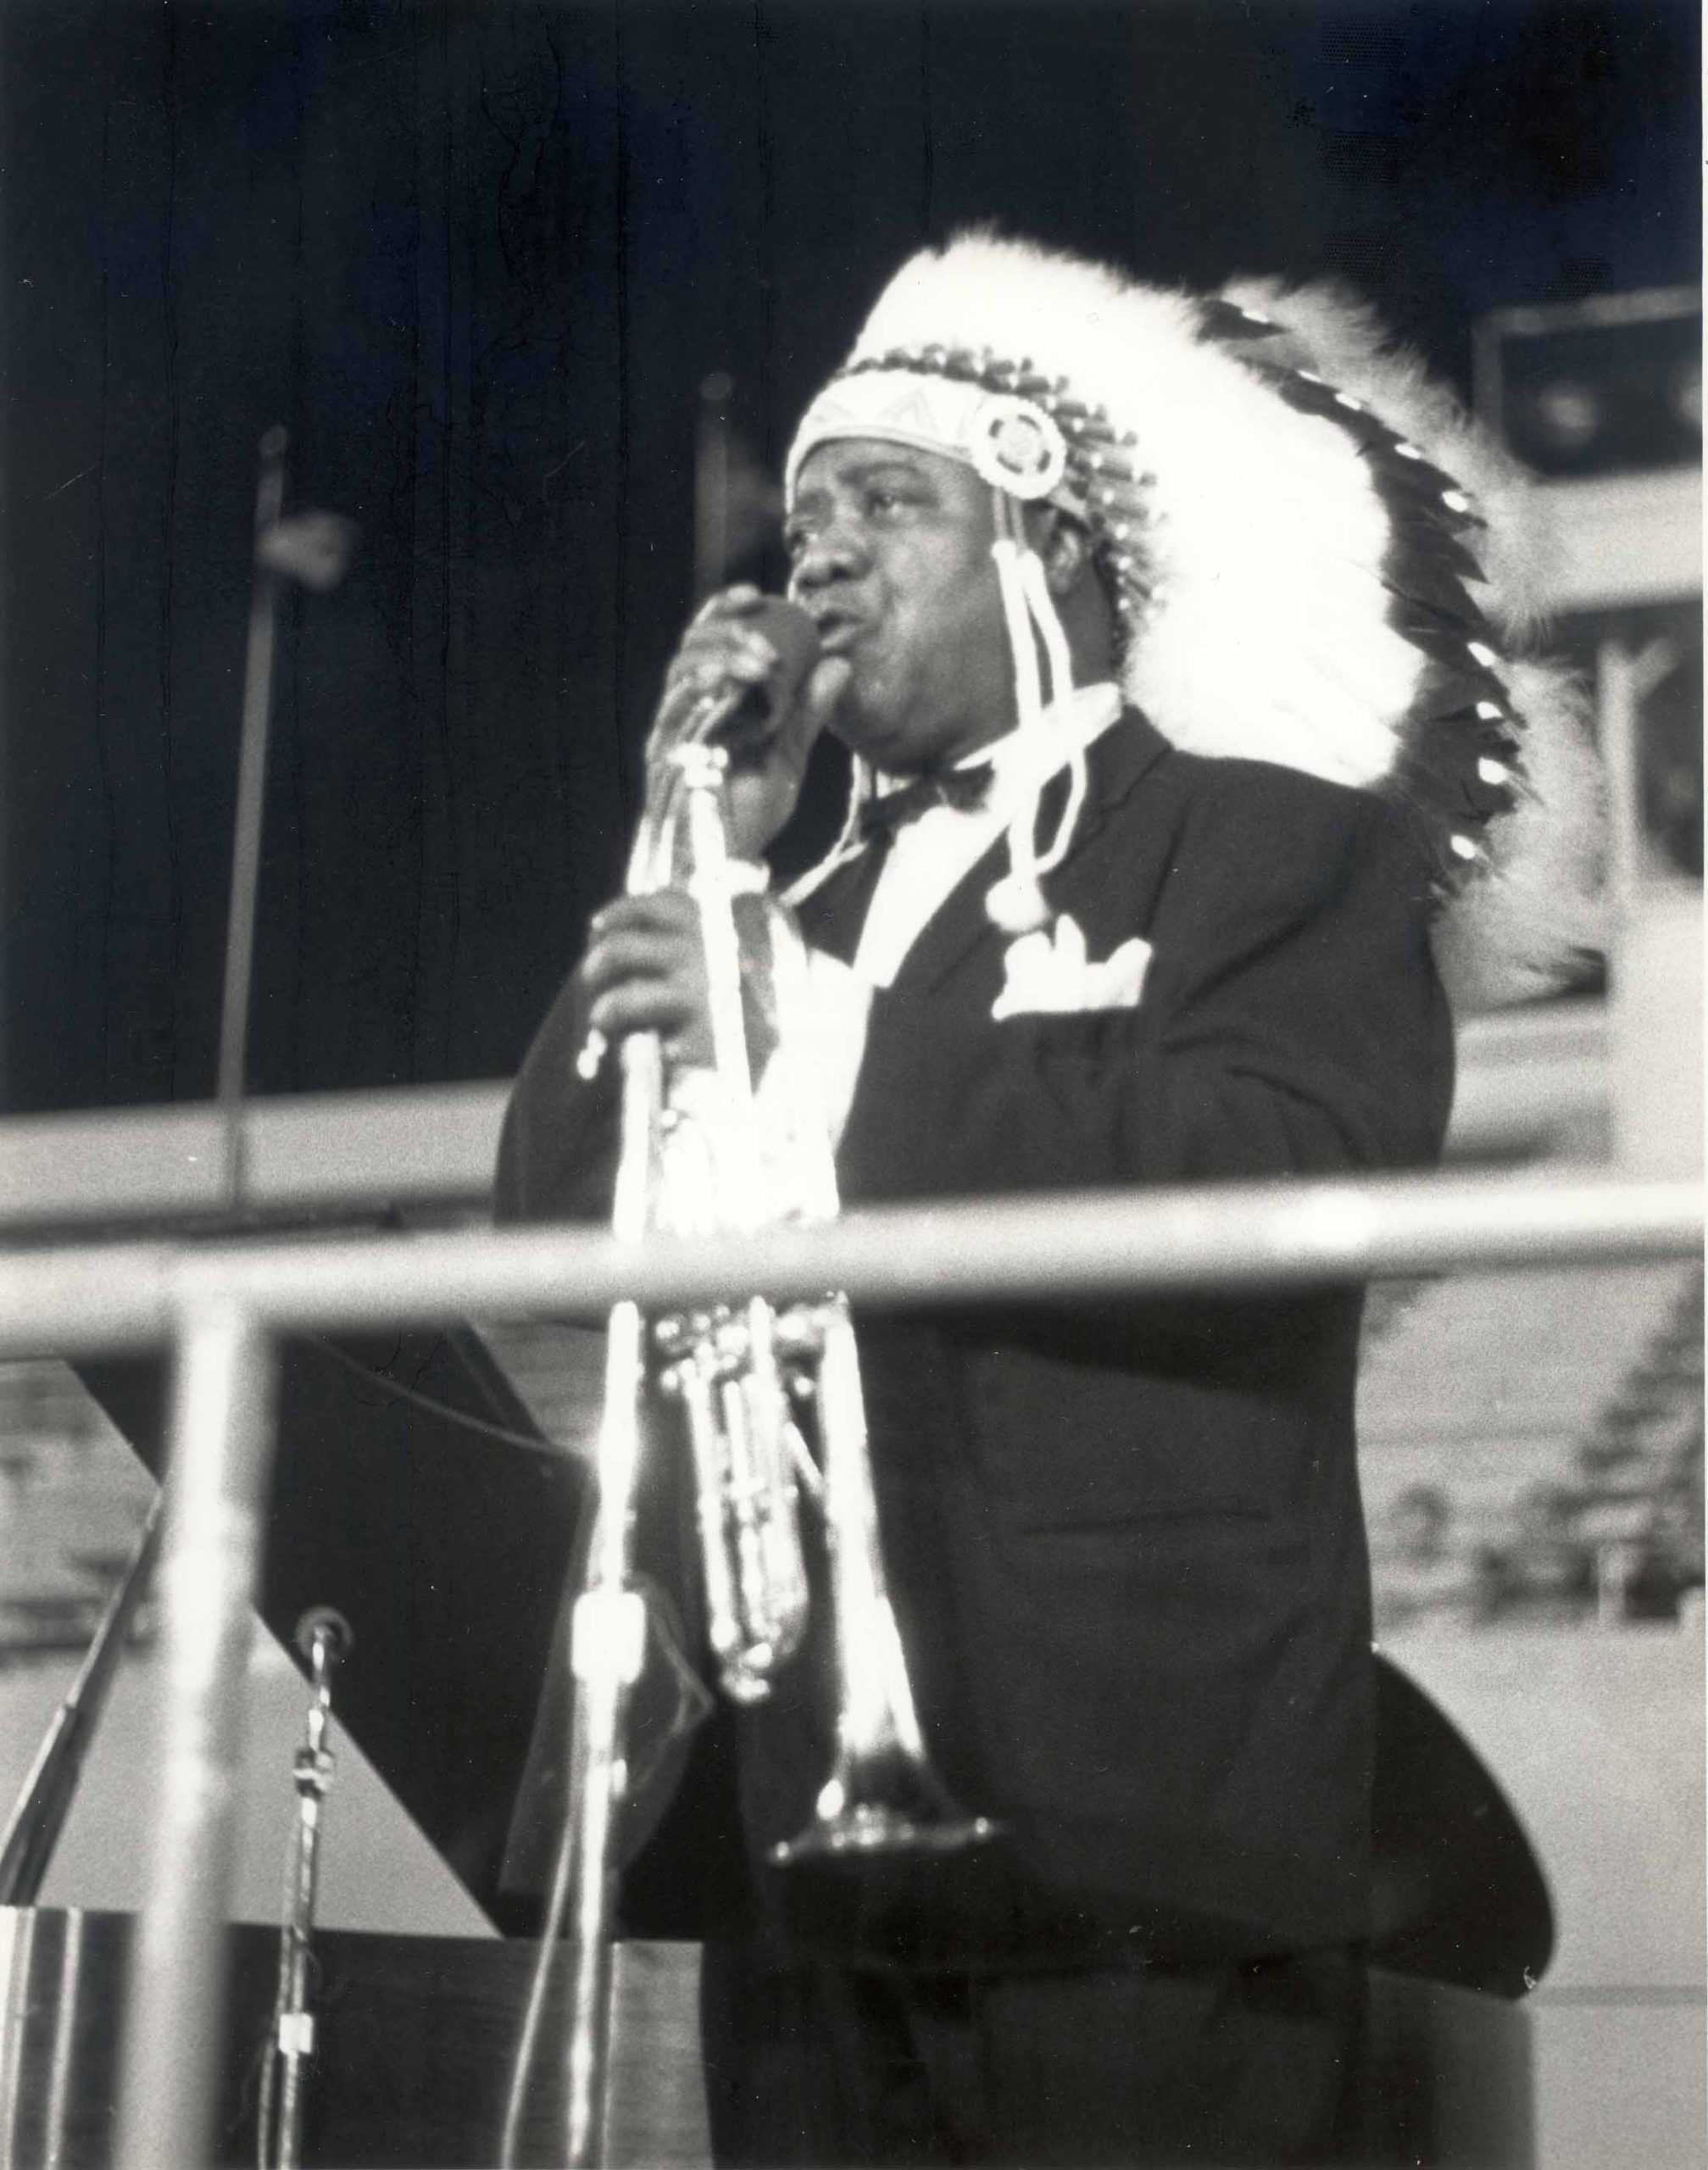 A black and white photograph of Louis Armstrong at a microphone. His hands are clasped around the microphone and stand, and he has an earnest expression on his face. He is dressed in a suit and wearing a Native American headdress.